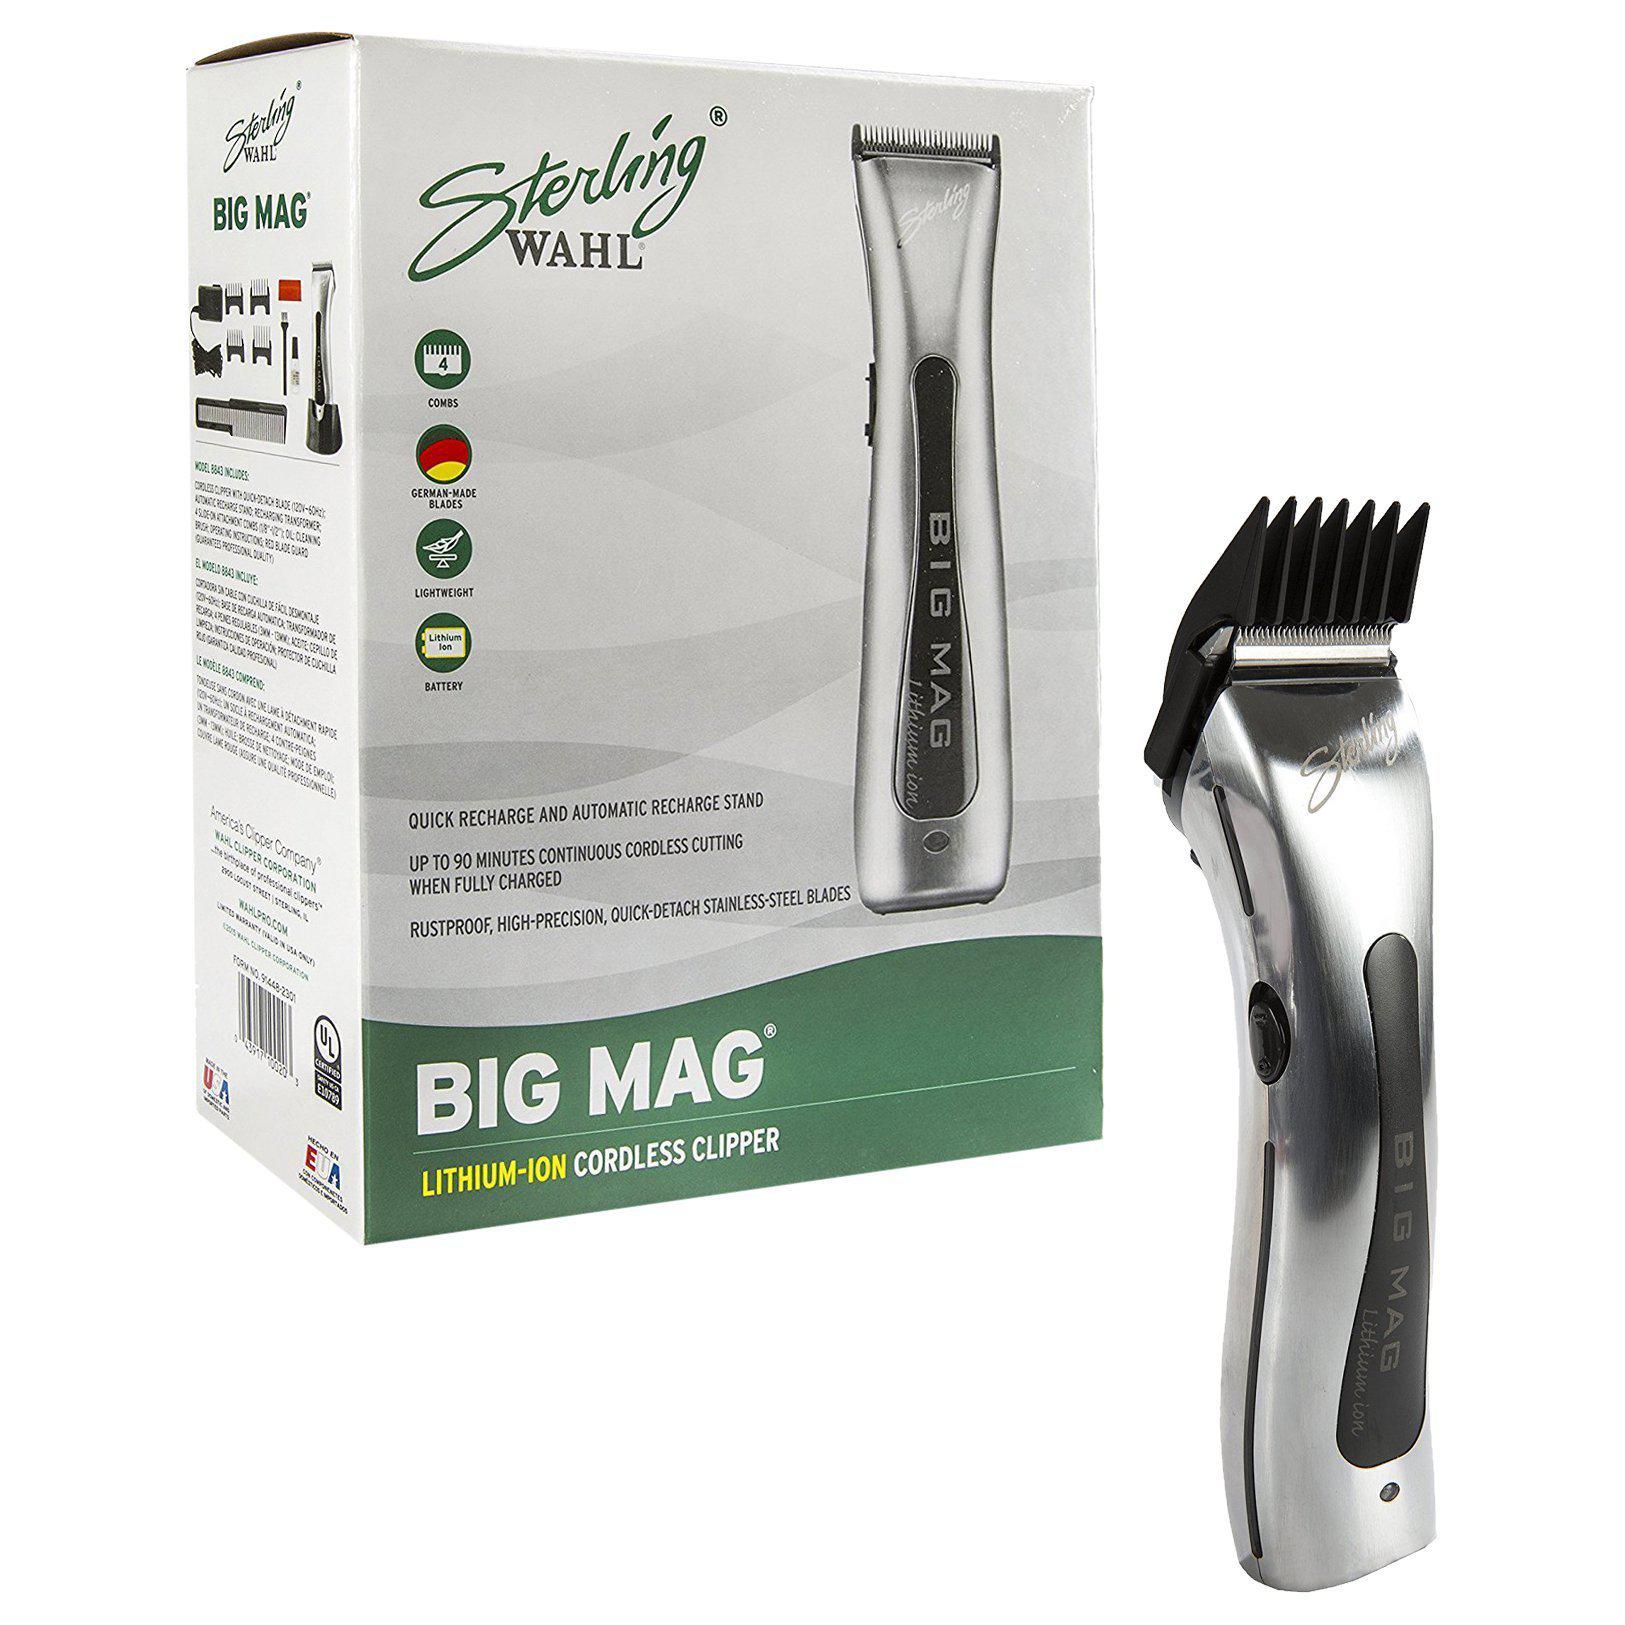 hair clippers wahl professional